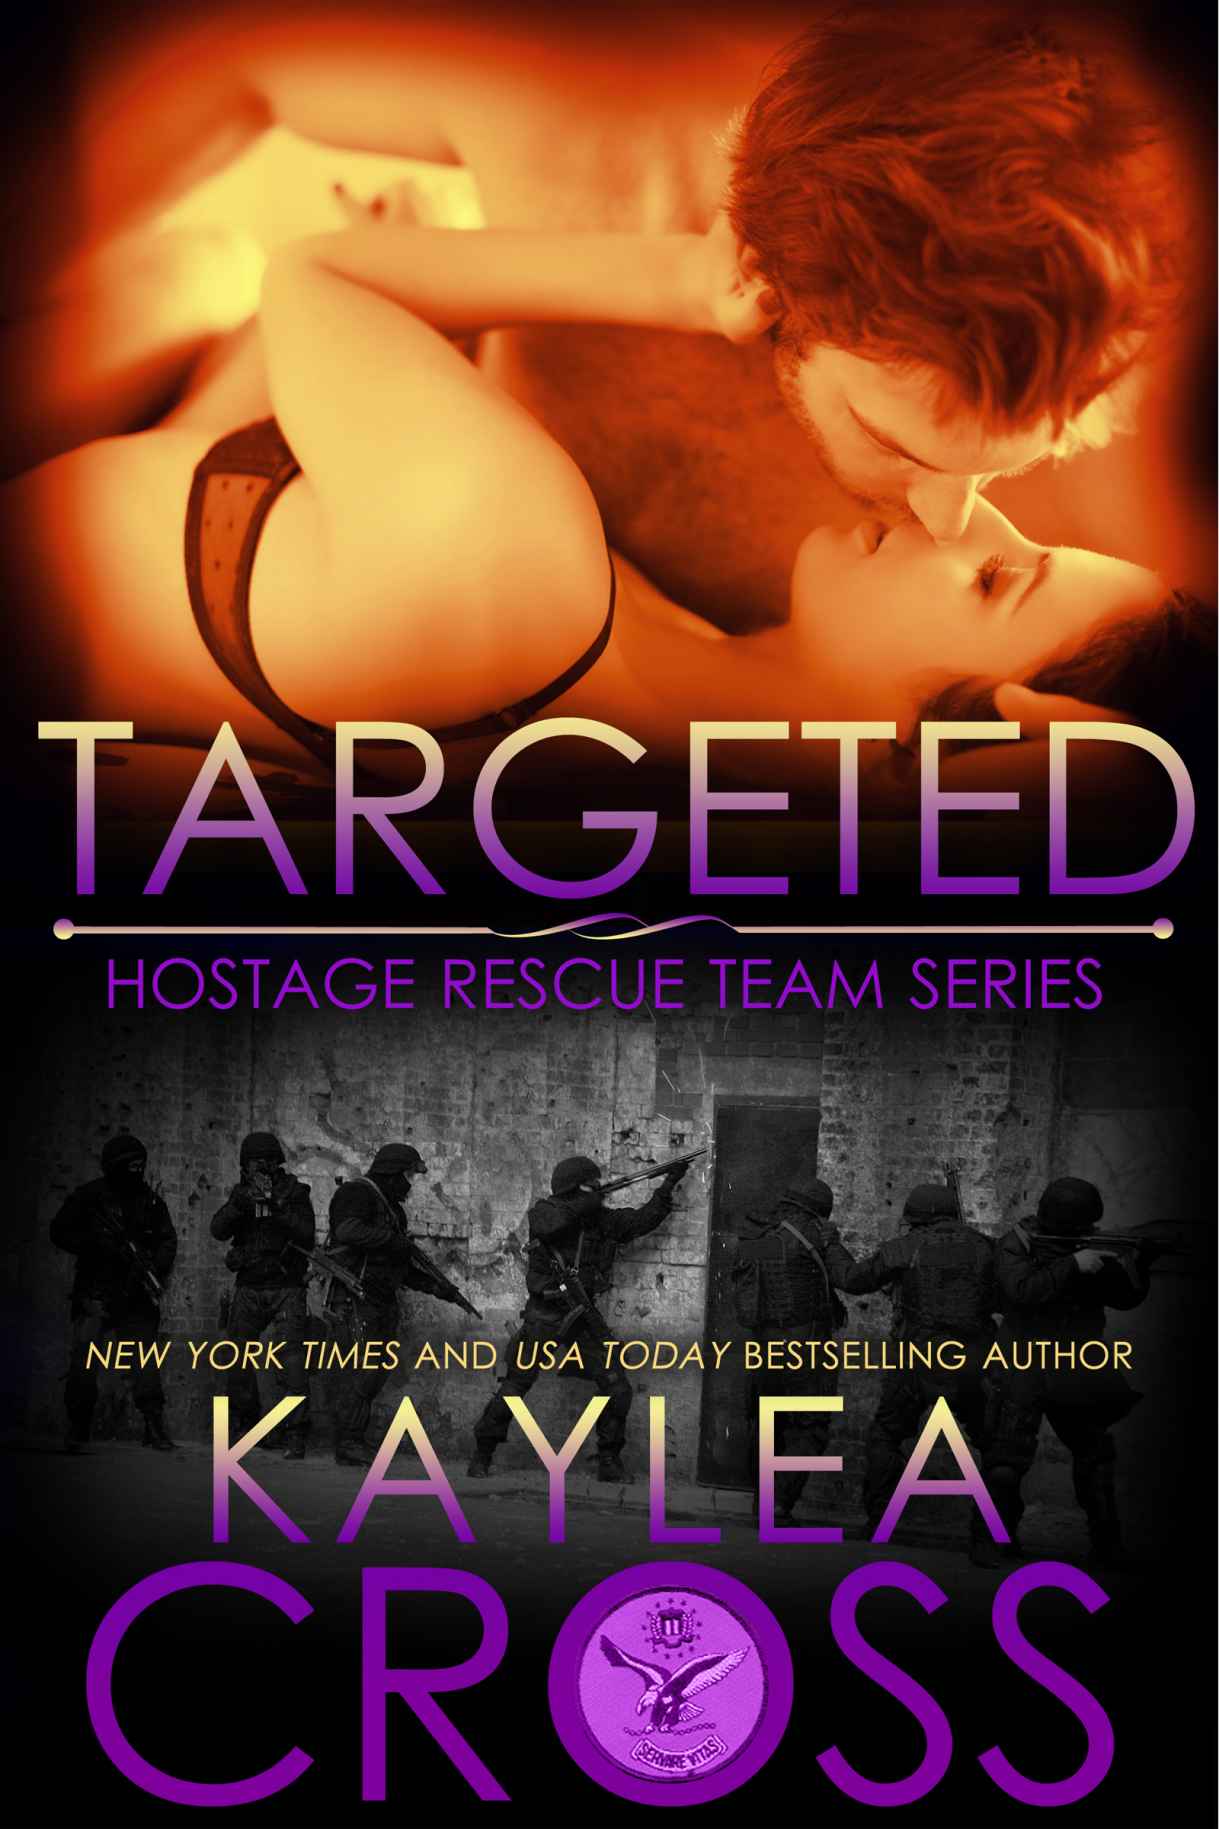 Targeted (Hostage Rescue Team Series Book 2) by Kaylea Cross